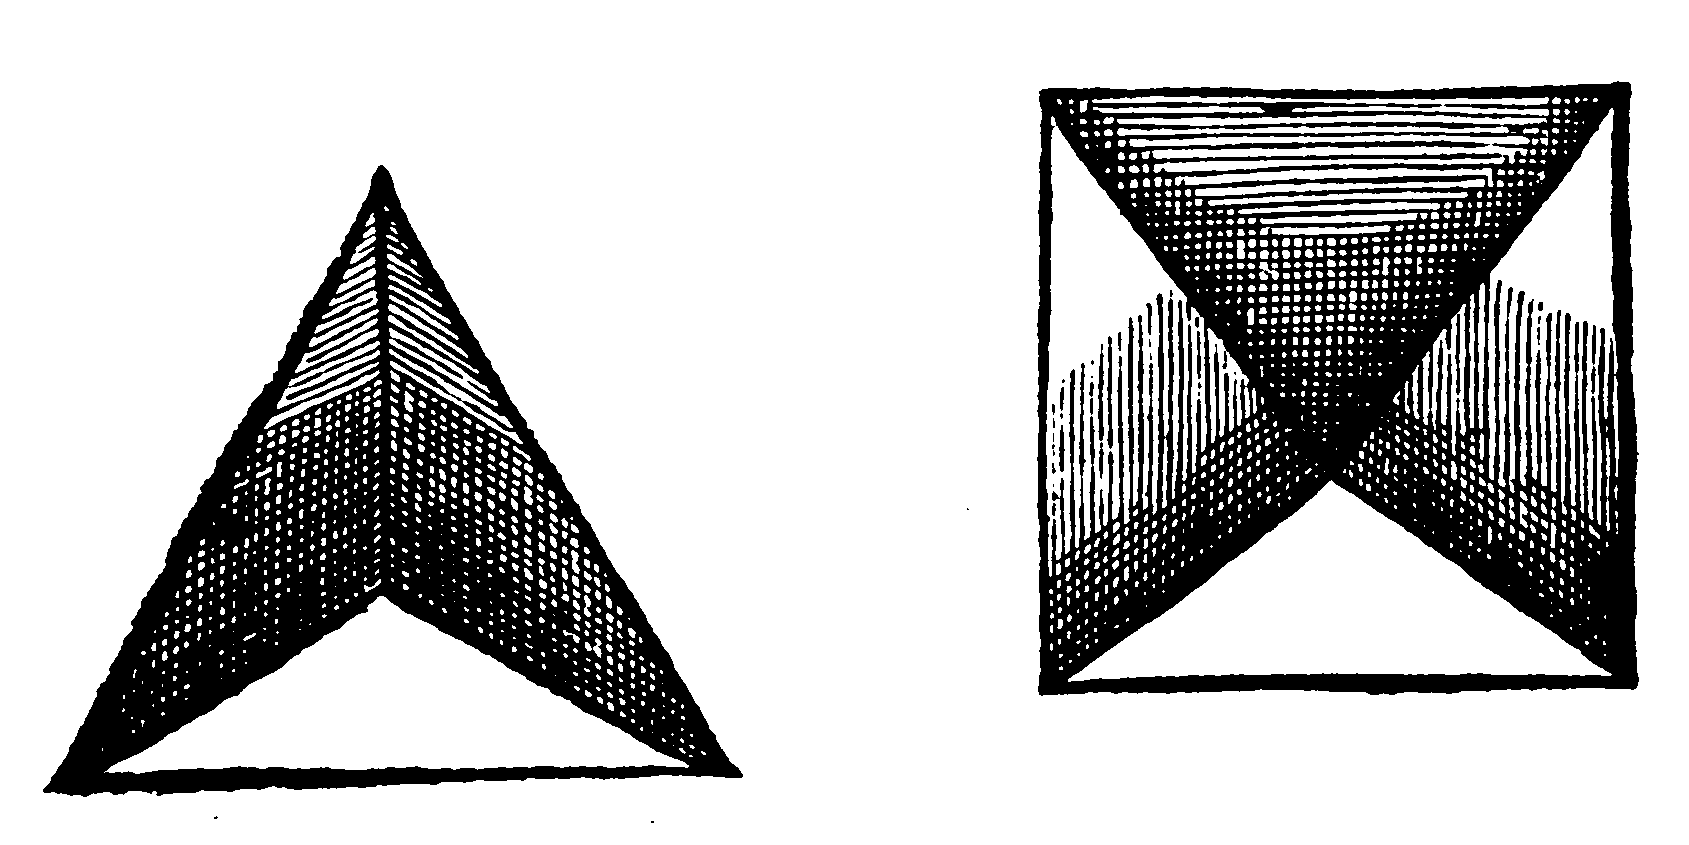 Sides of Pyramides.